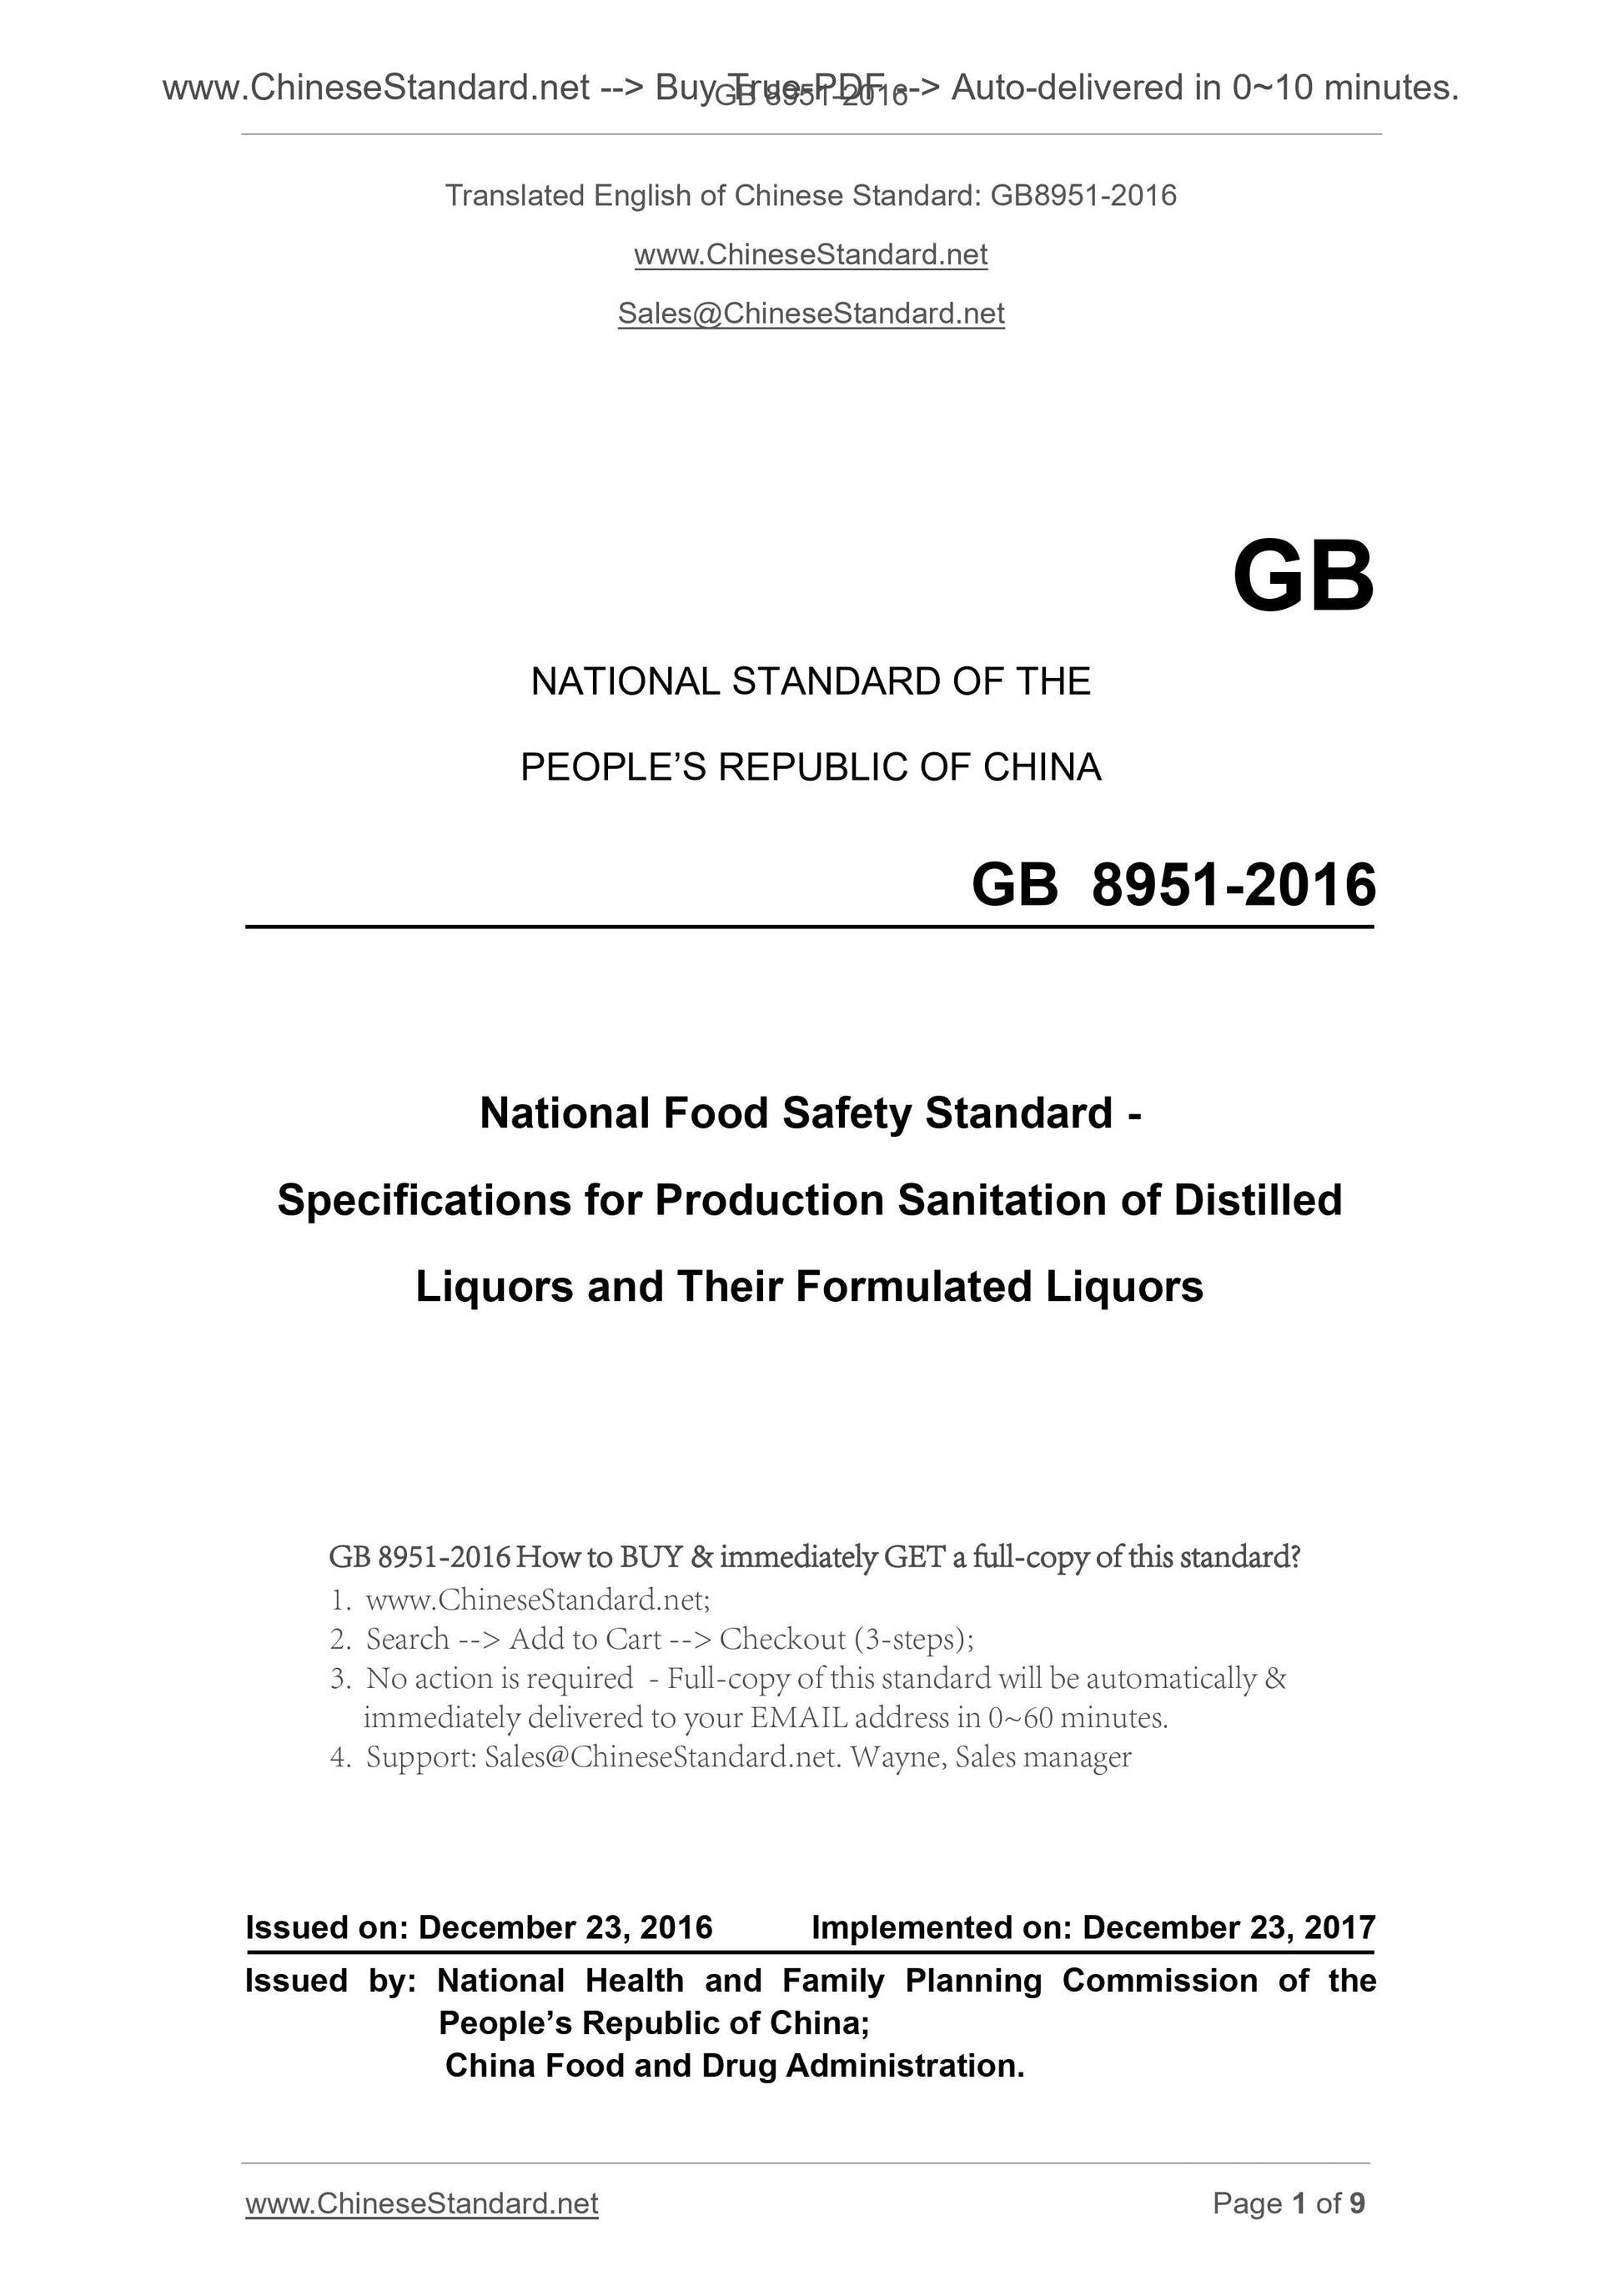 GB 8951-2016 Page 1